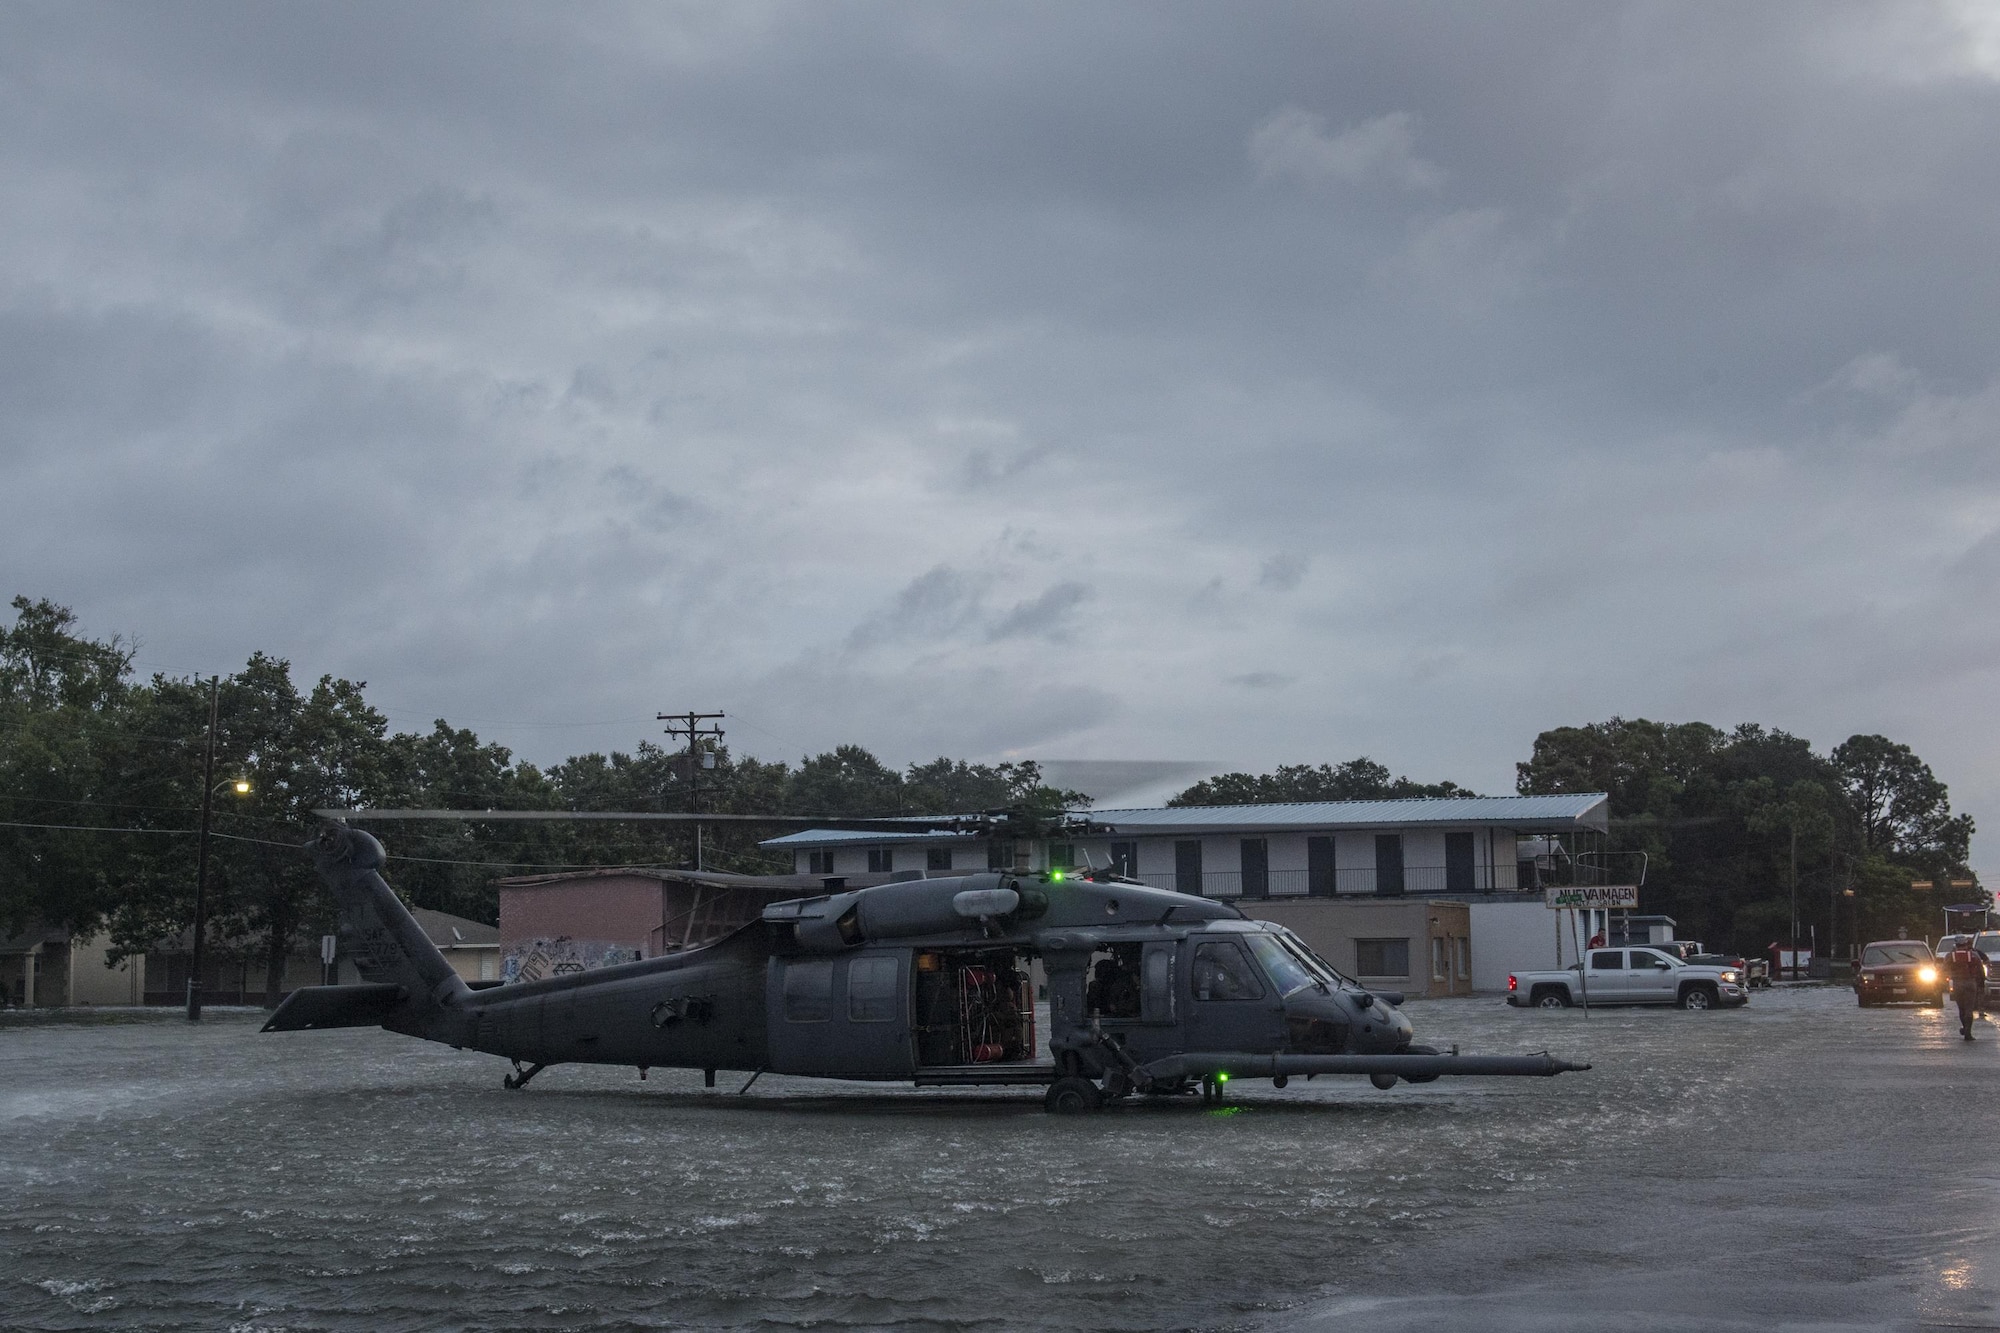 An HH-60G Pave Hawk, assigned to the 41st Rescue Squadron waits for an evacuee onload, Aug. 30, 2017, in the Houston, Texas area.